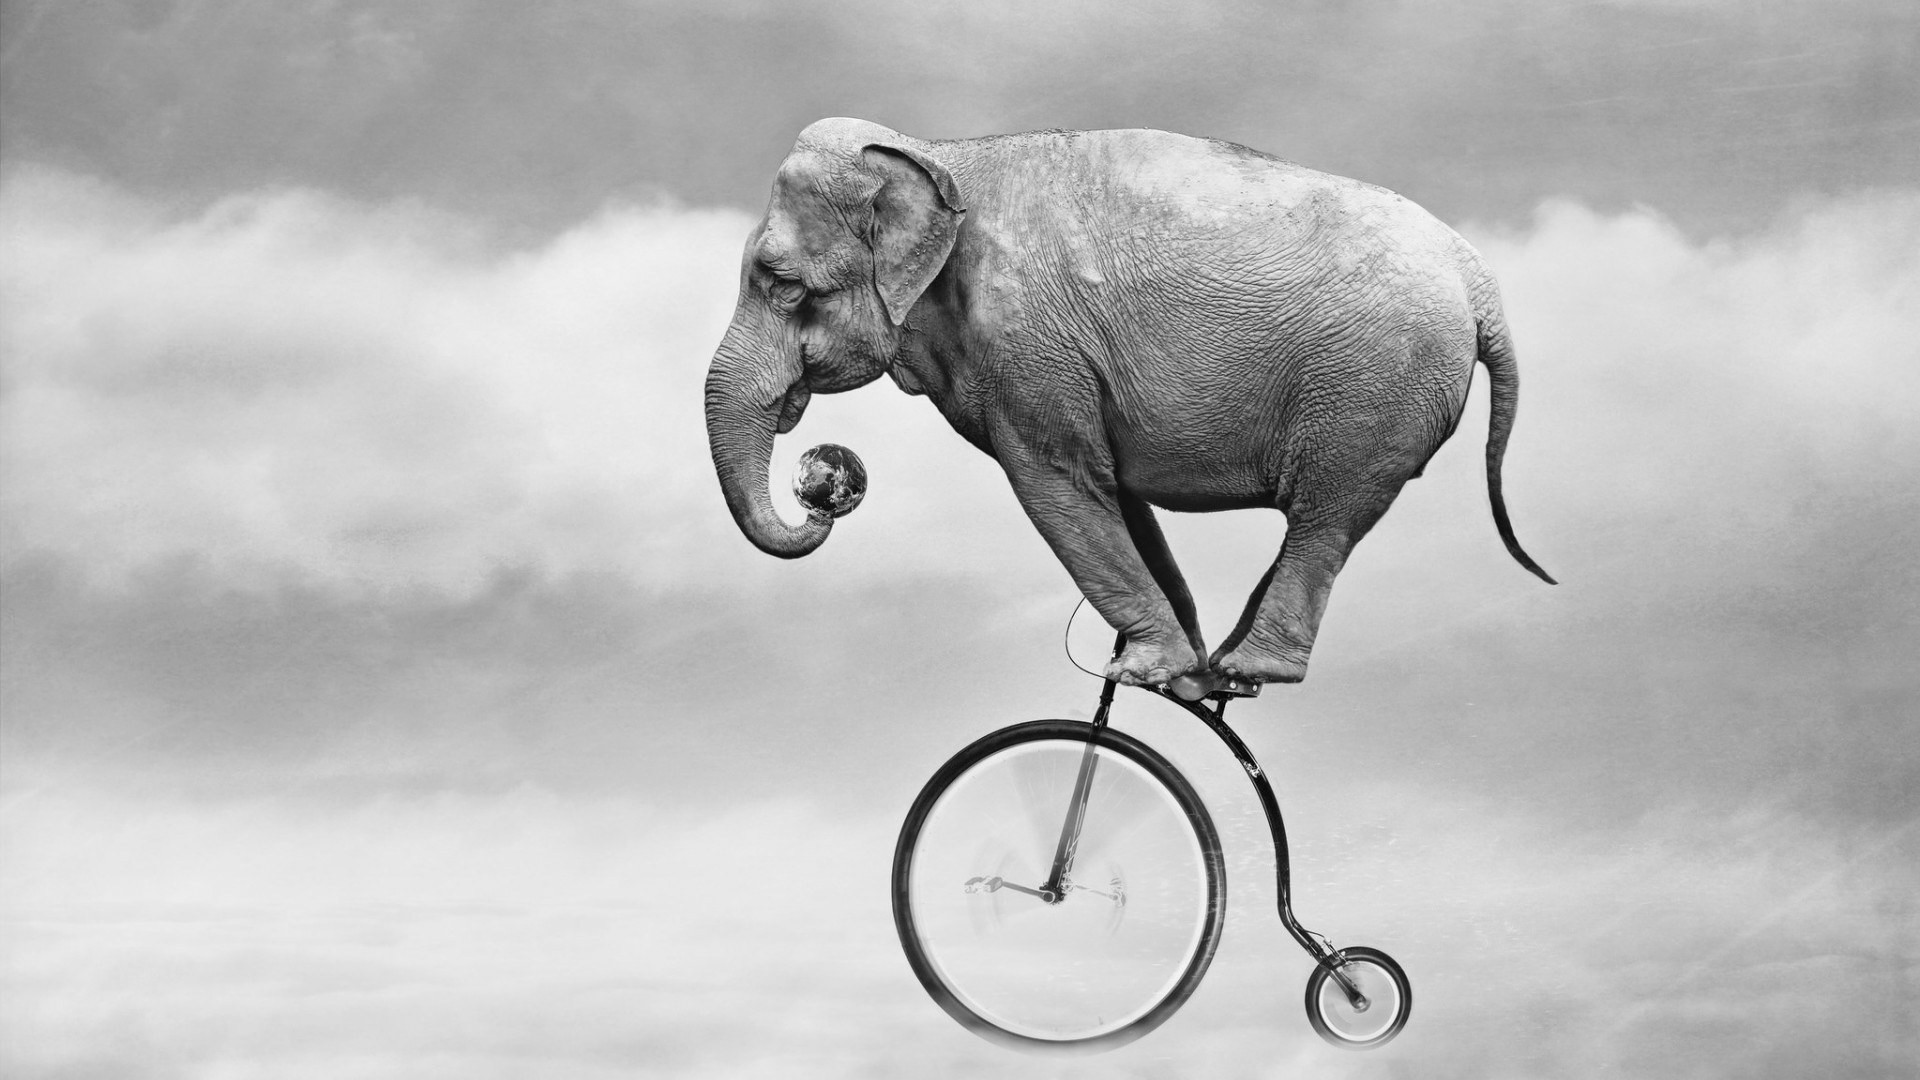 nature animals elephants bicycle humor monochrome earth clouds motion blur Wallpaper